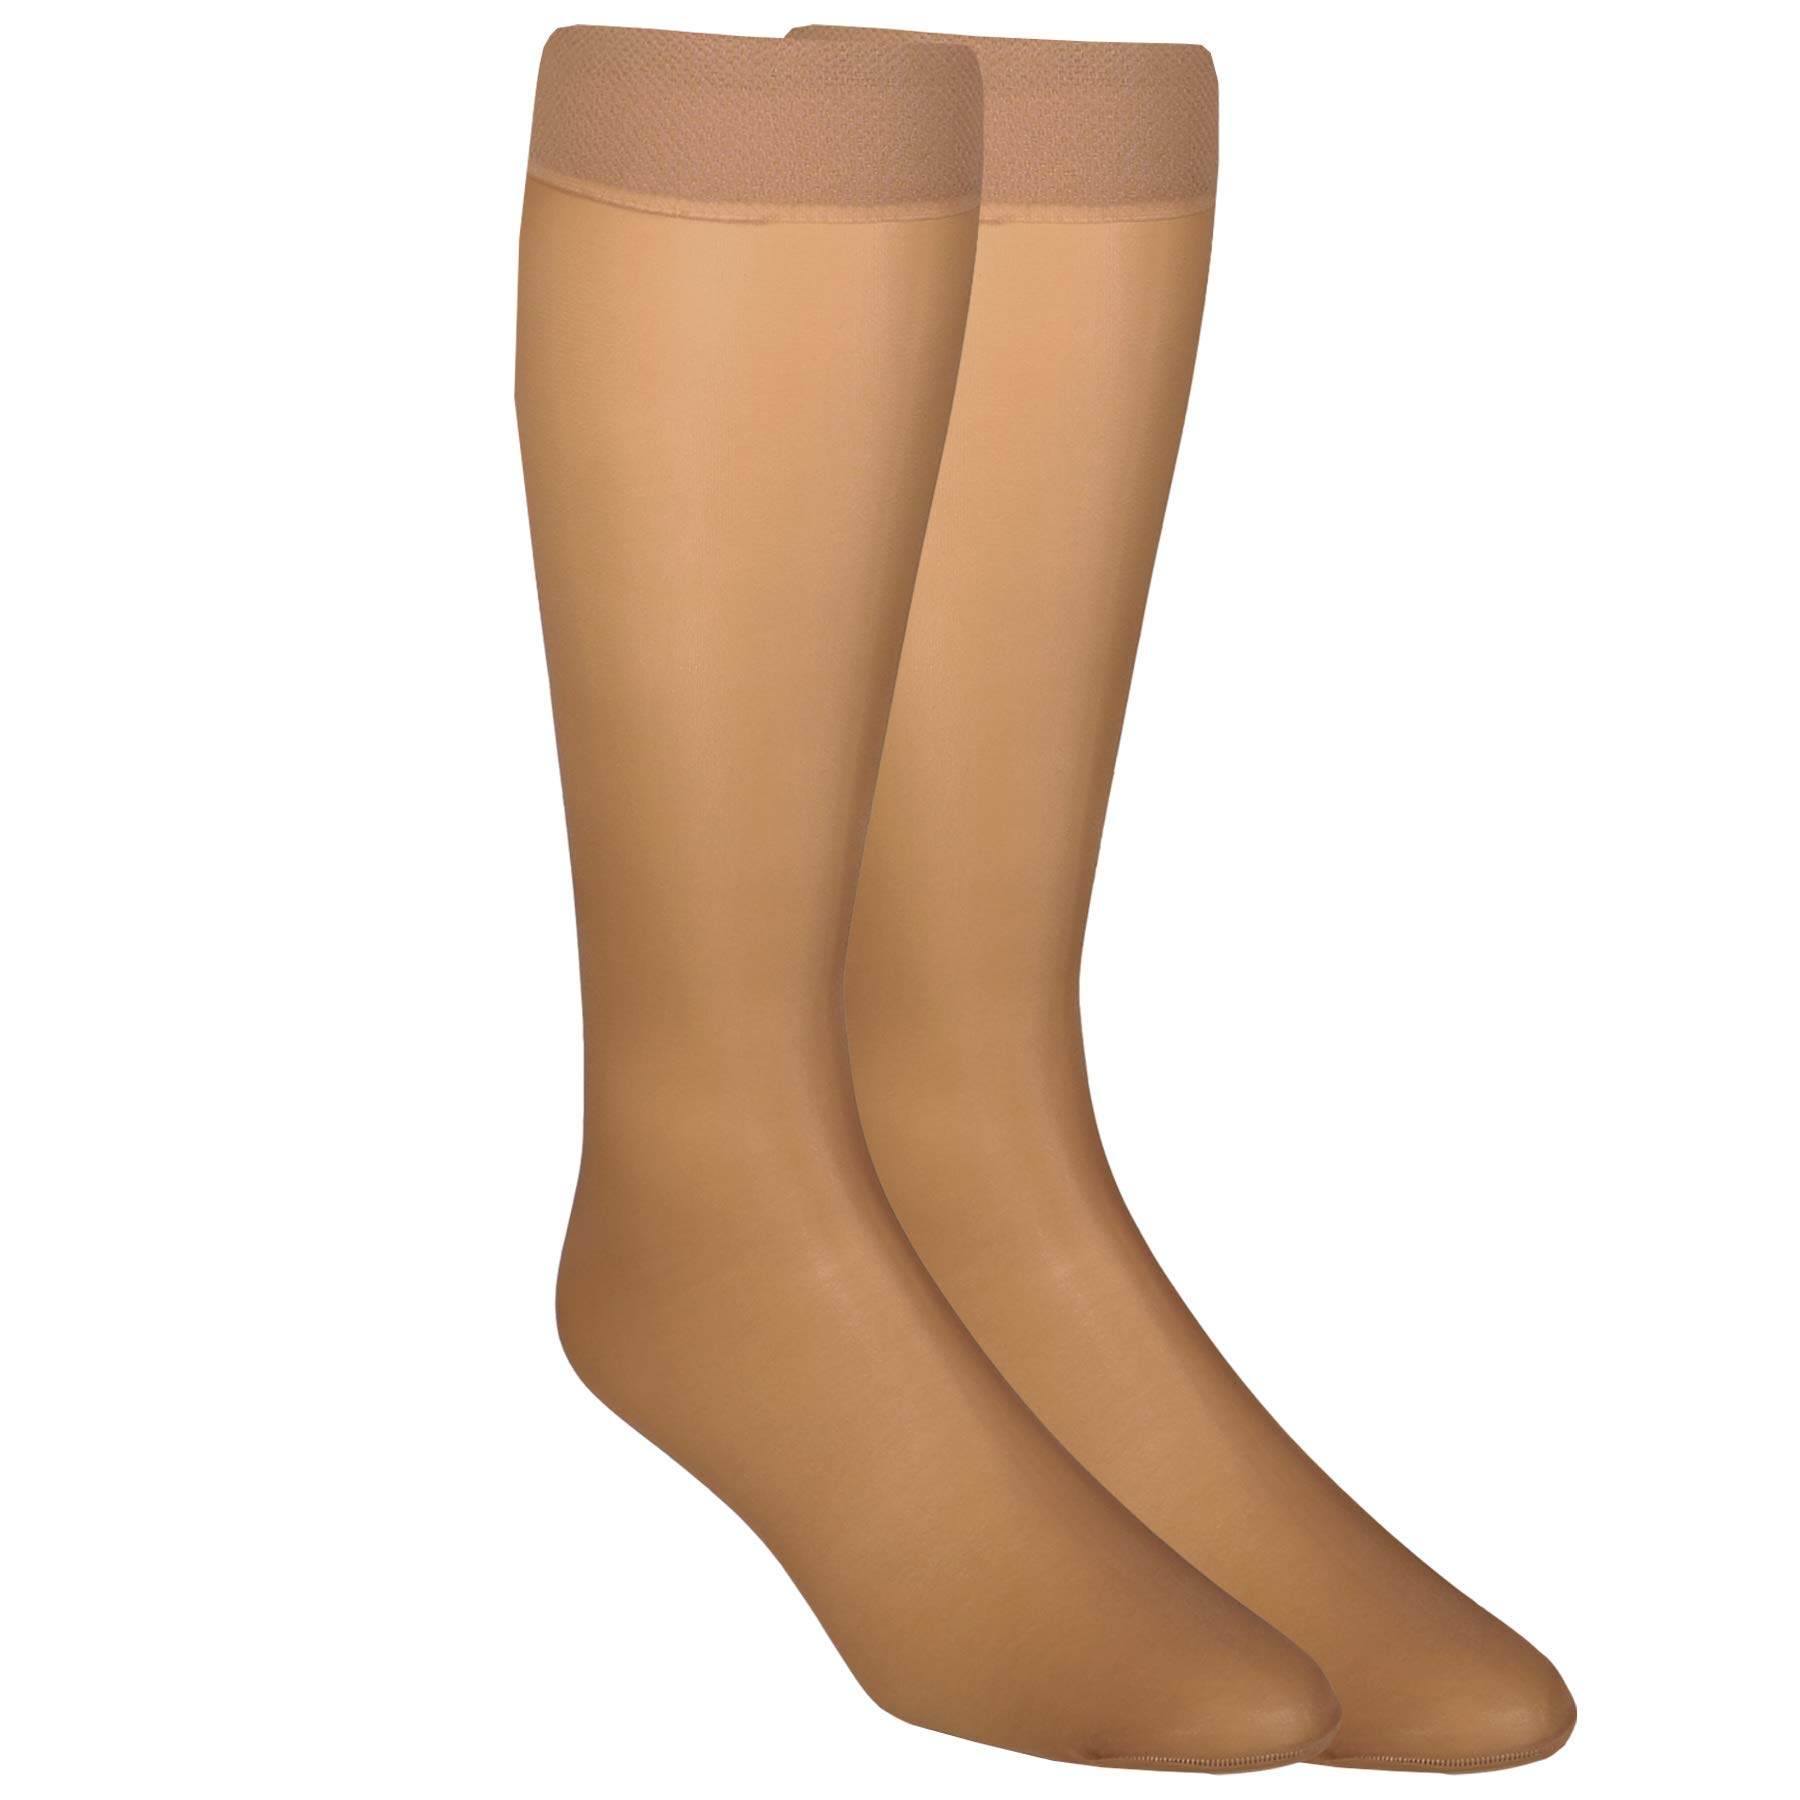 NuVein Sheer Compression Stockings for Women, 8-15 mmHg Support, Light Denier, Knee High, Closed Toe